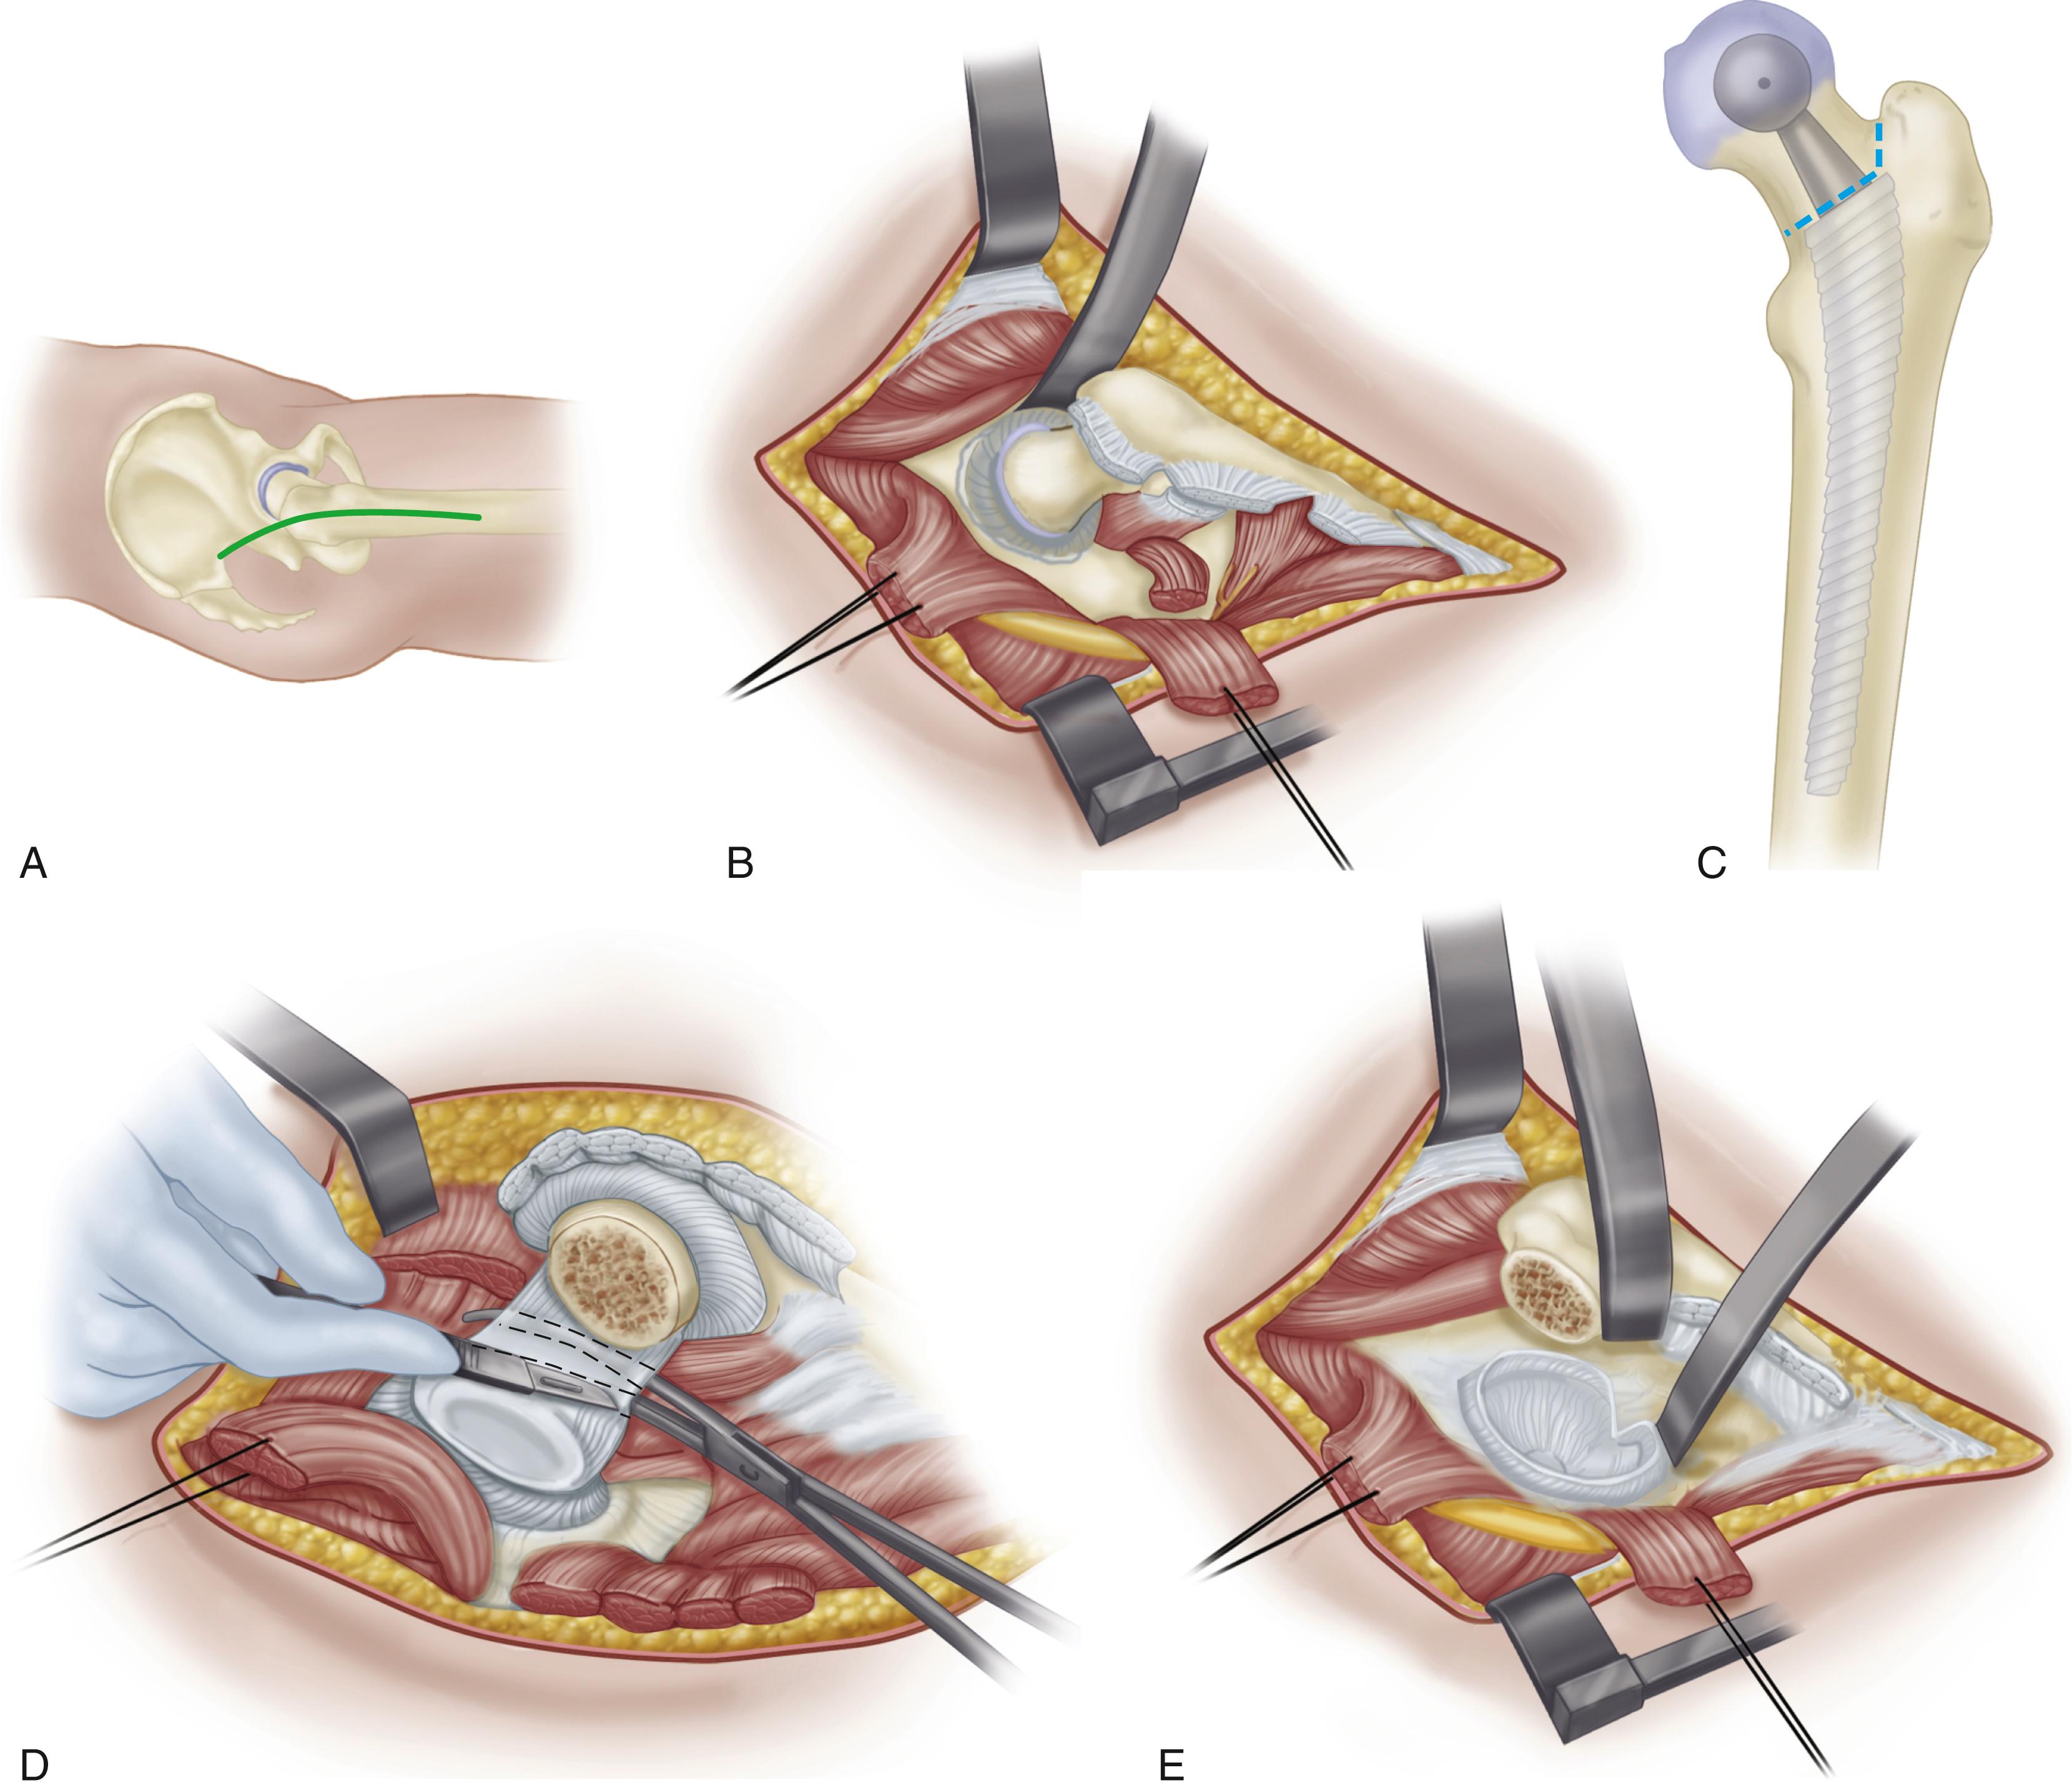 FIGURE 3.43, A, Skin incision for posterolateral approach to hip. B, Completed posterior soft-tissue dissection. C, Neck cut planned at appropriate level and angle by using trial components of templated size. D, Anterior capsule divided along course of psoas tendon sheath. E, Femur retracted well anteriorly to allow unimpeded access to acetabulum. ( A, B, and E redrawn from Capello WN: Uncemented hip replacement, Tech Orthop 1:11, 1986; also Courtesy Indiana University School of Medicine.) SEE TECHNIQUES 3.2 AND 3.4.